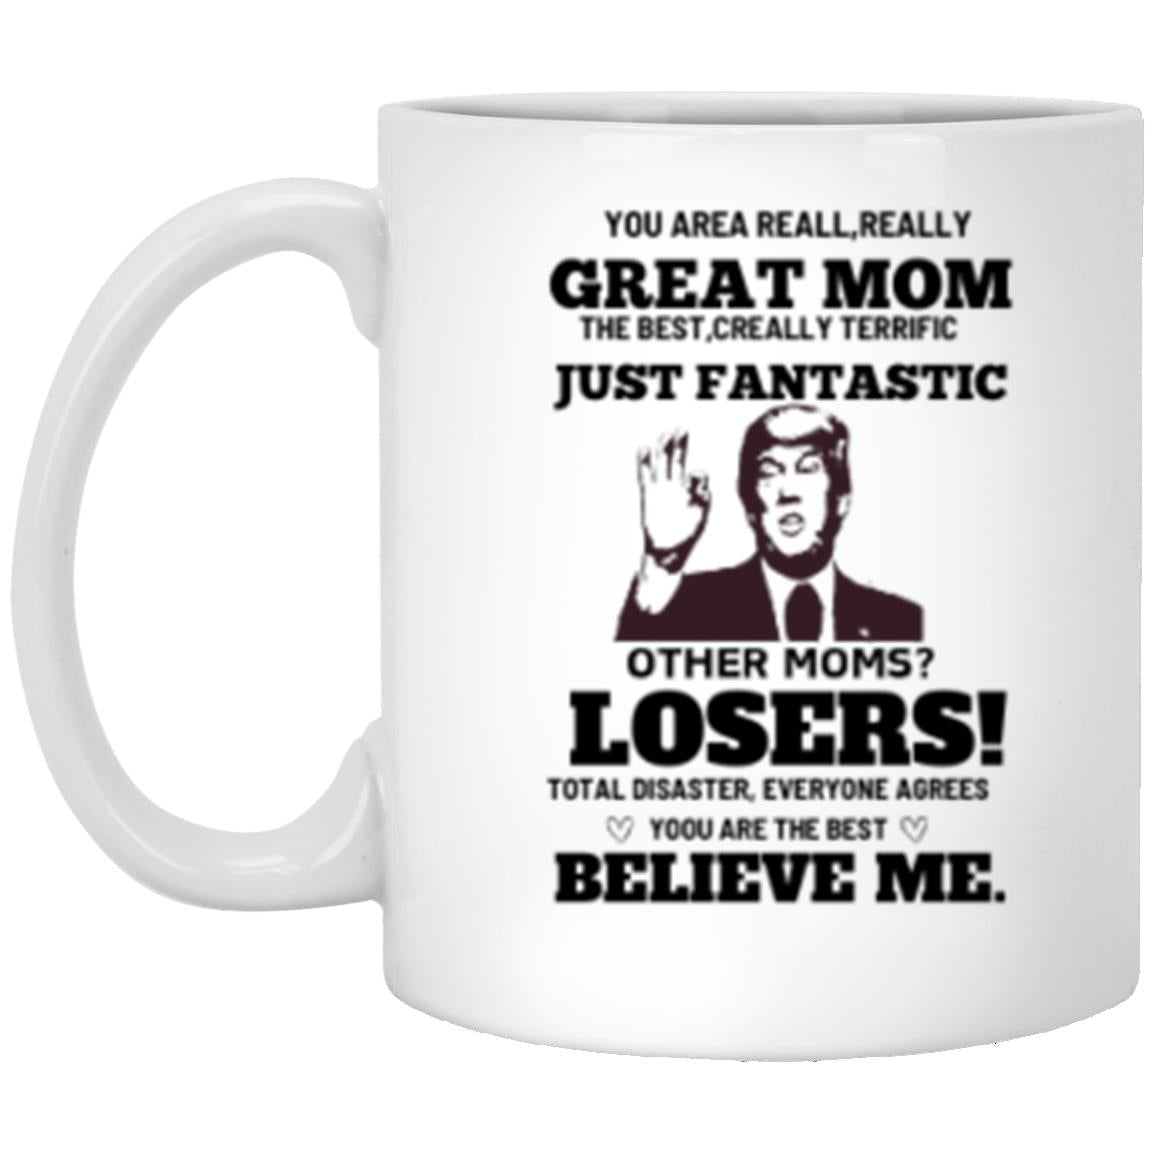 Double sided mom mug ,Funny Gifts for mom , Birthday Gifts for Mom from Daughter Son